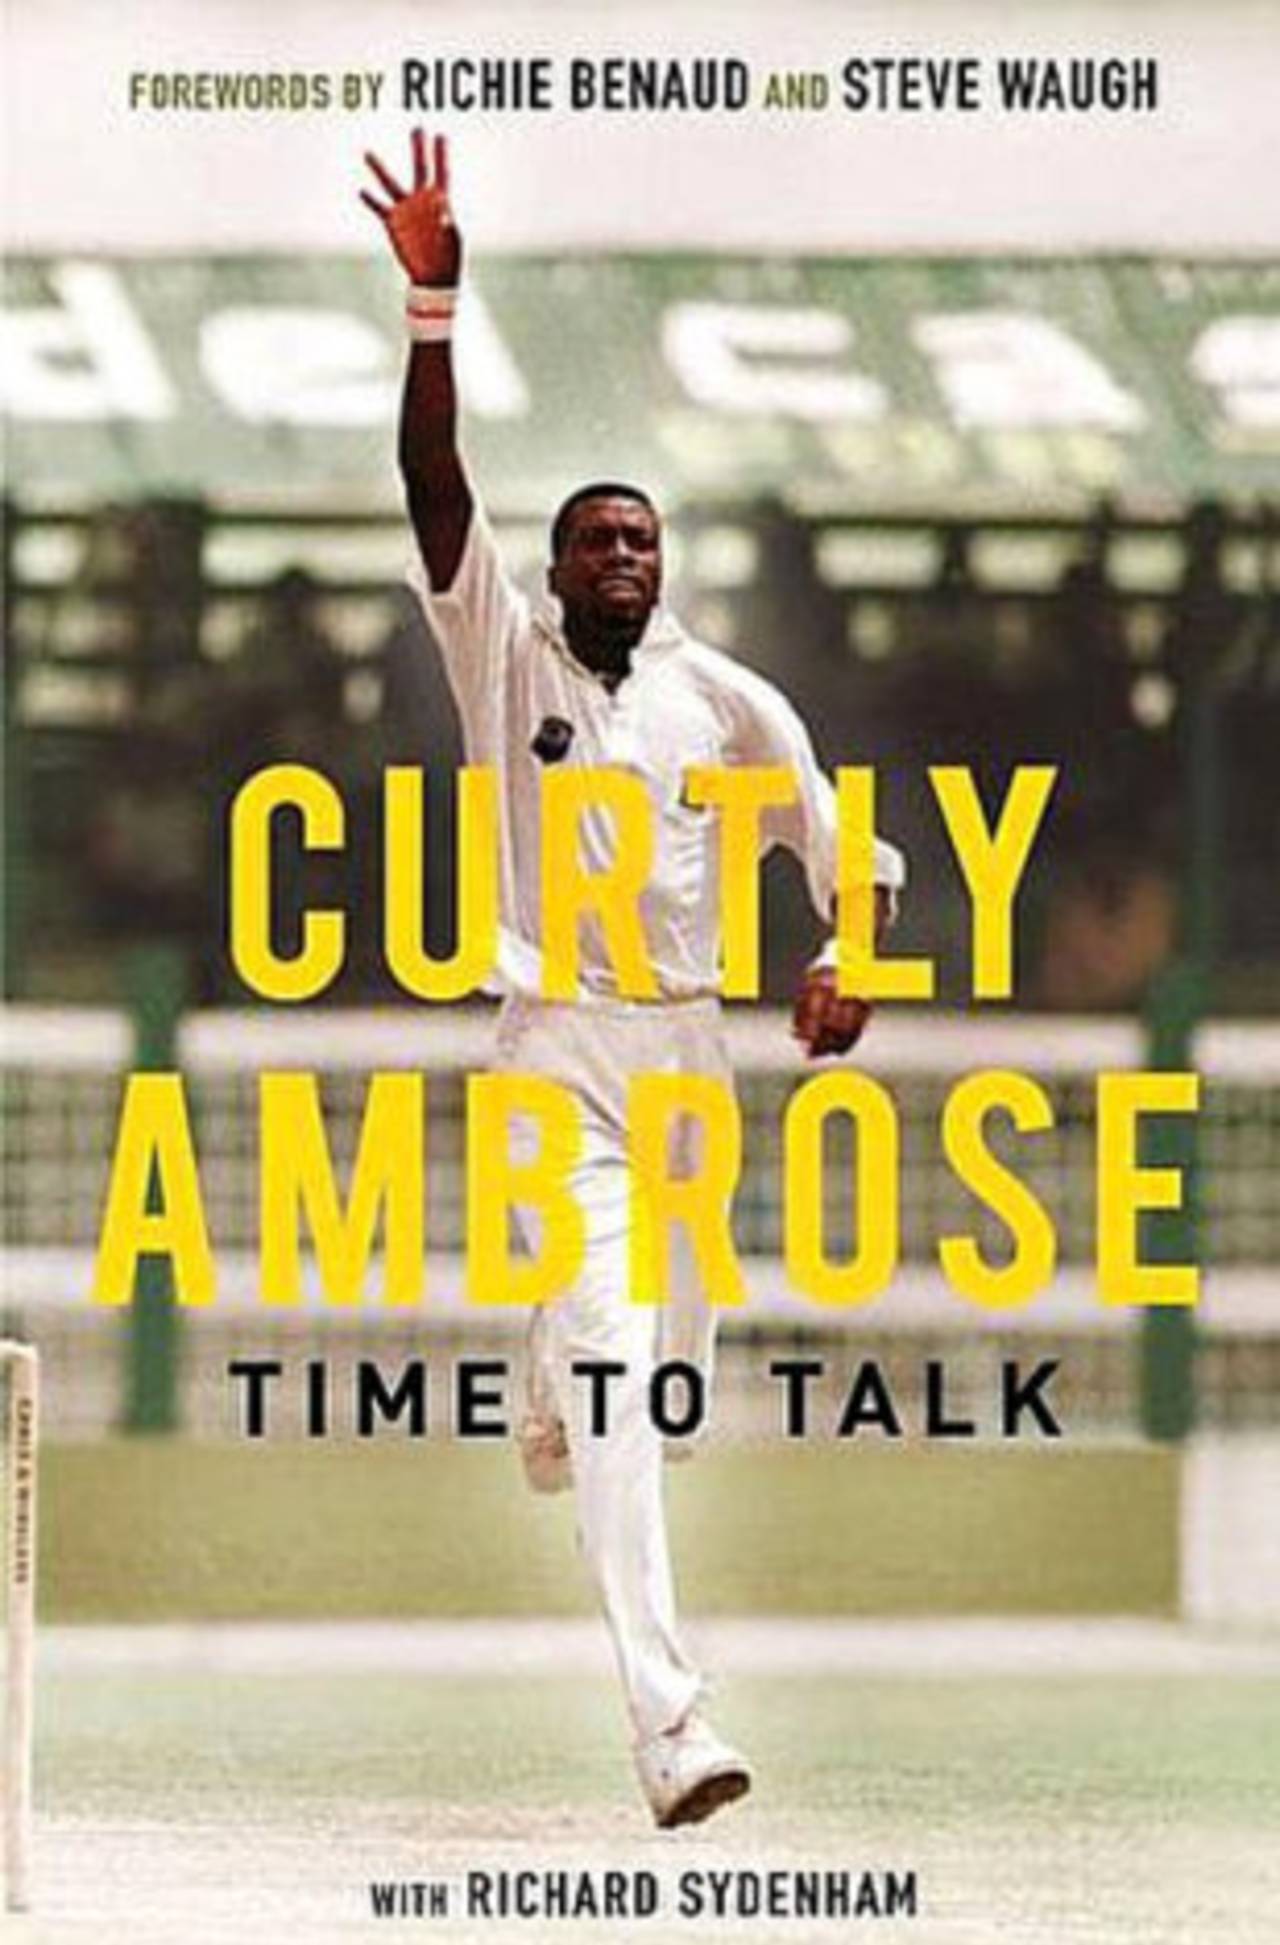 Cover image of Curtly Ambrose's <i>Time to Talk</i>